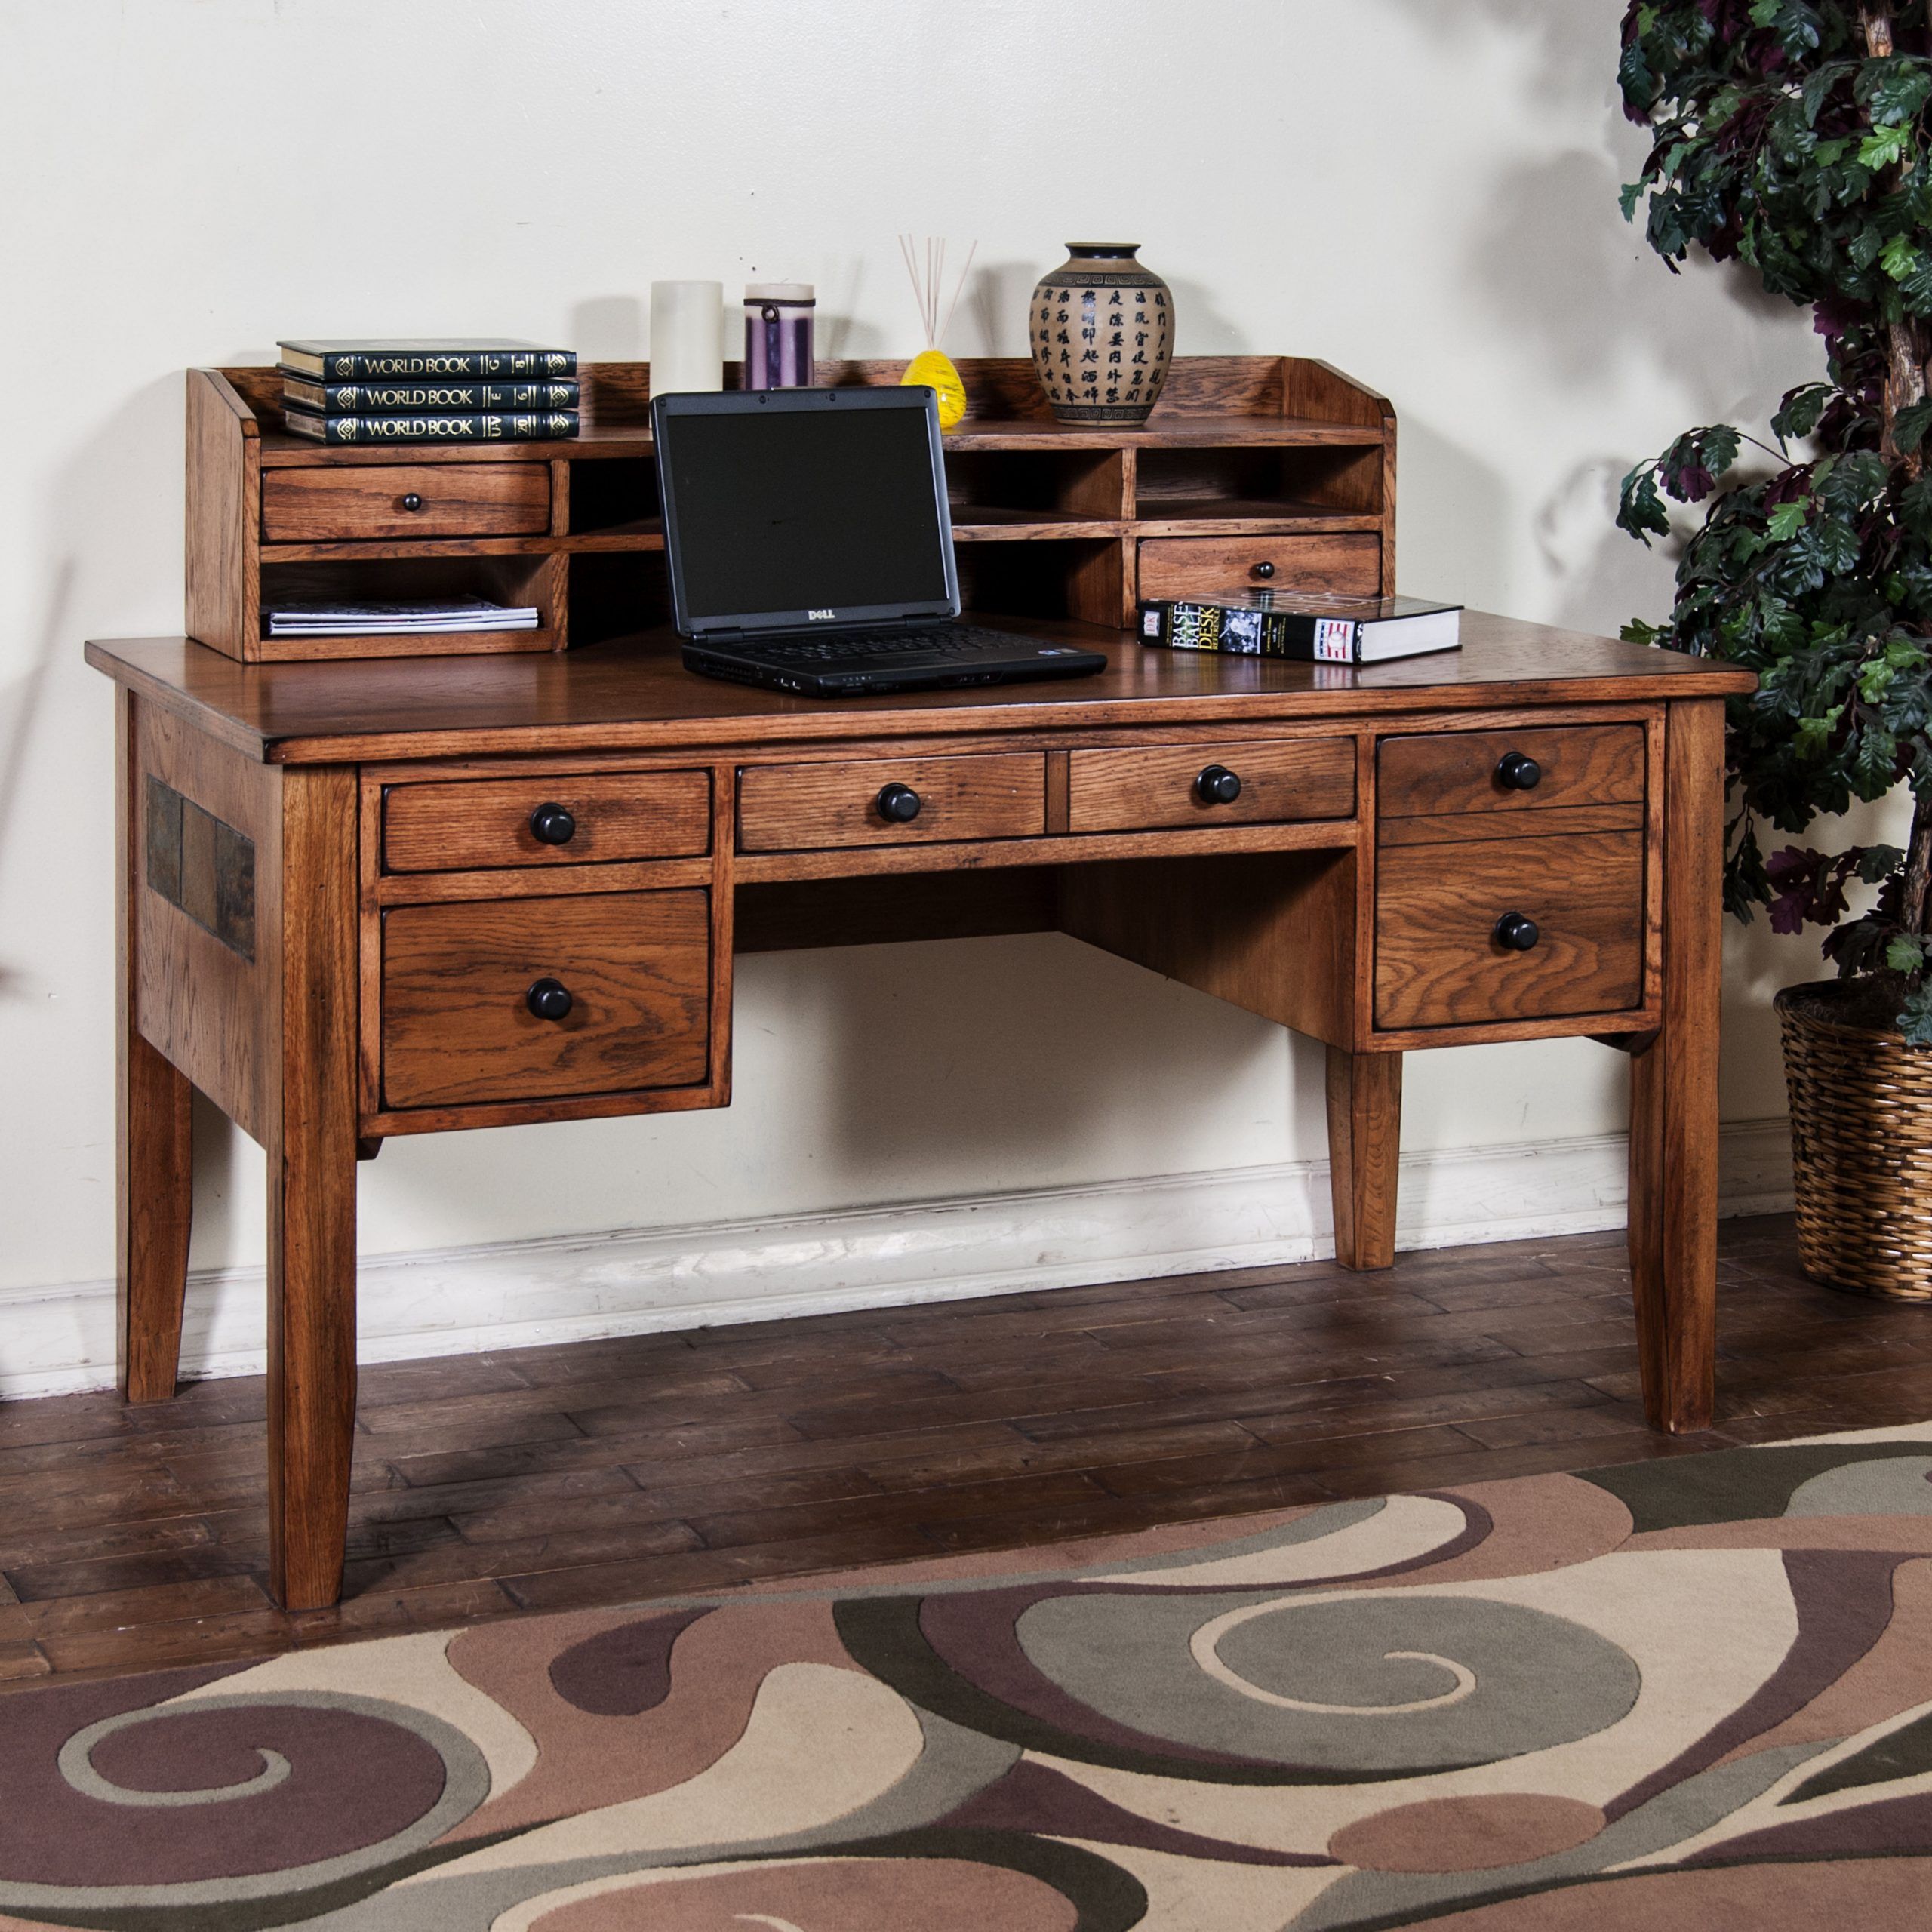 Sedona Rustic Oak Wood Writing Desks W/hutch | The Classy Home For Rustic Acacia Wooden Writing Desks (View 7 of 15)